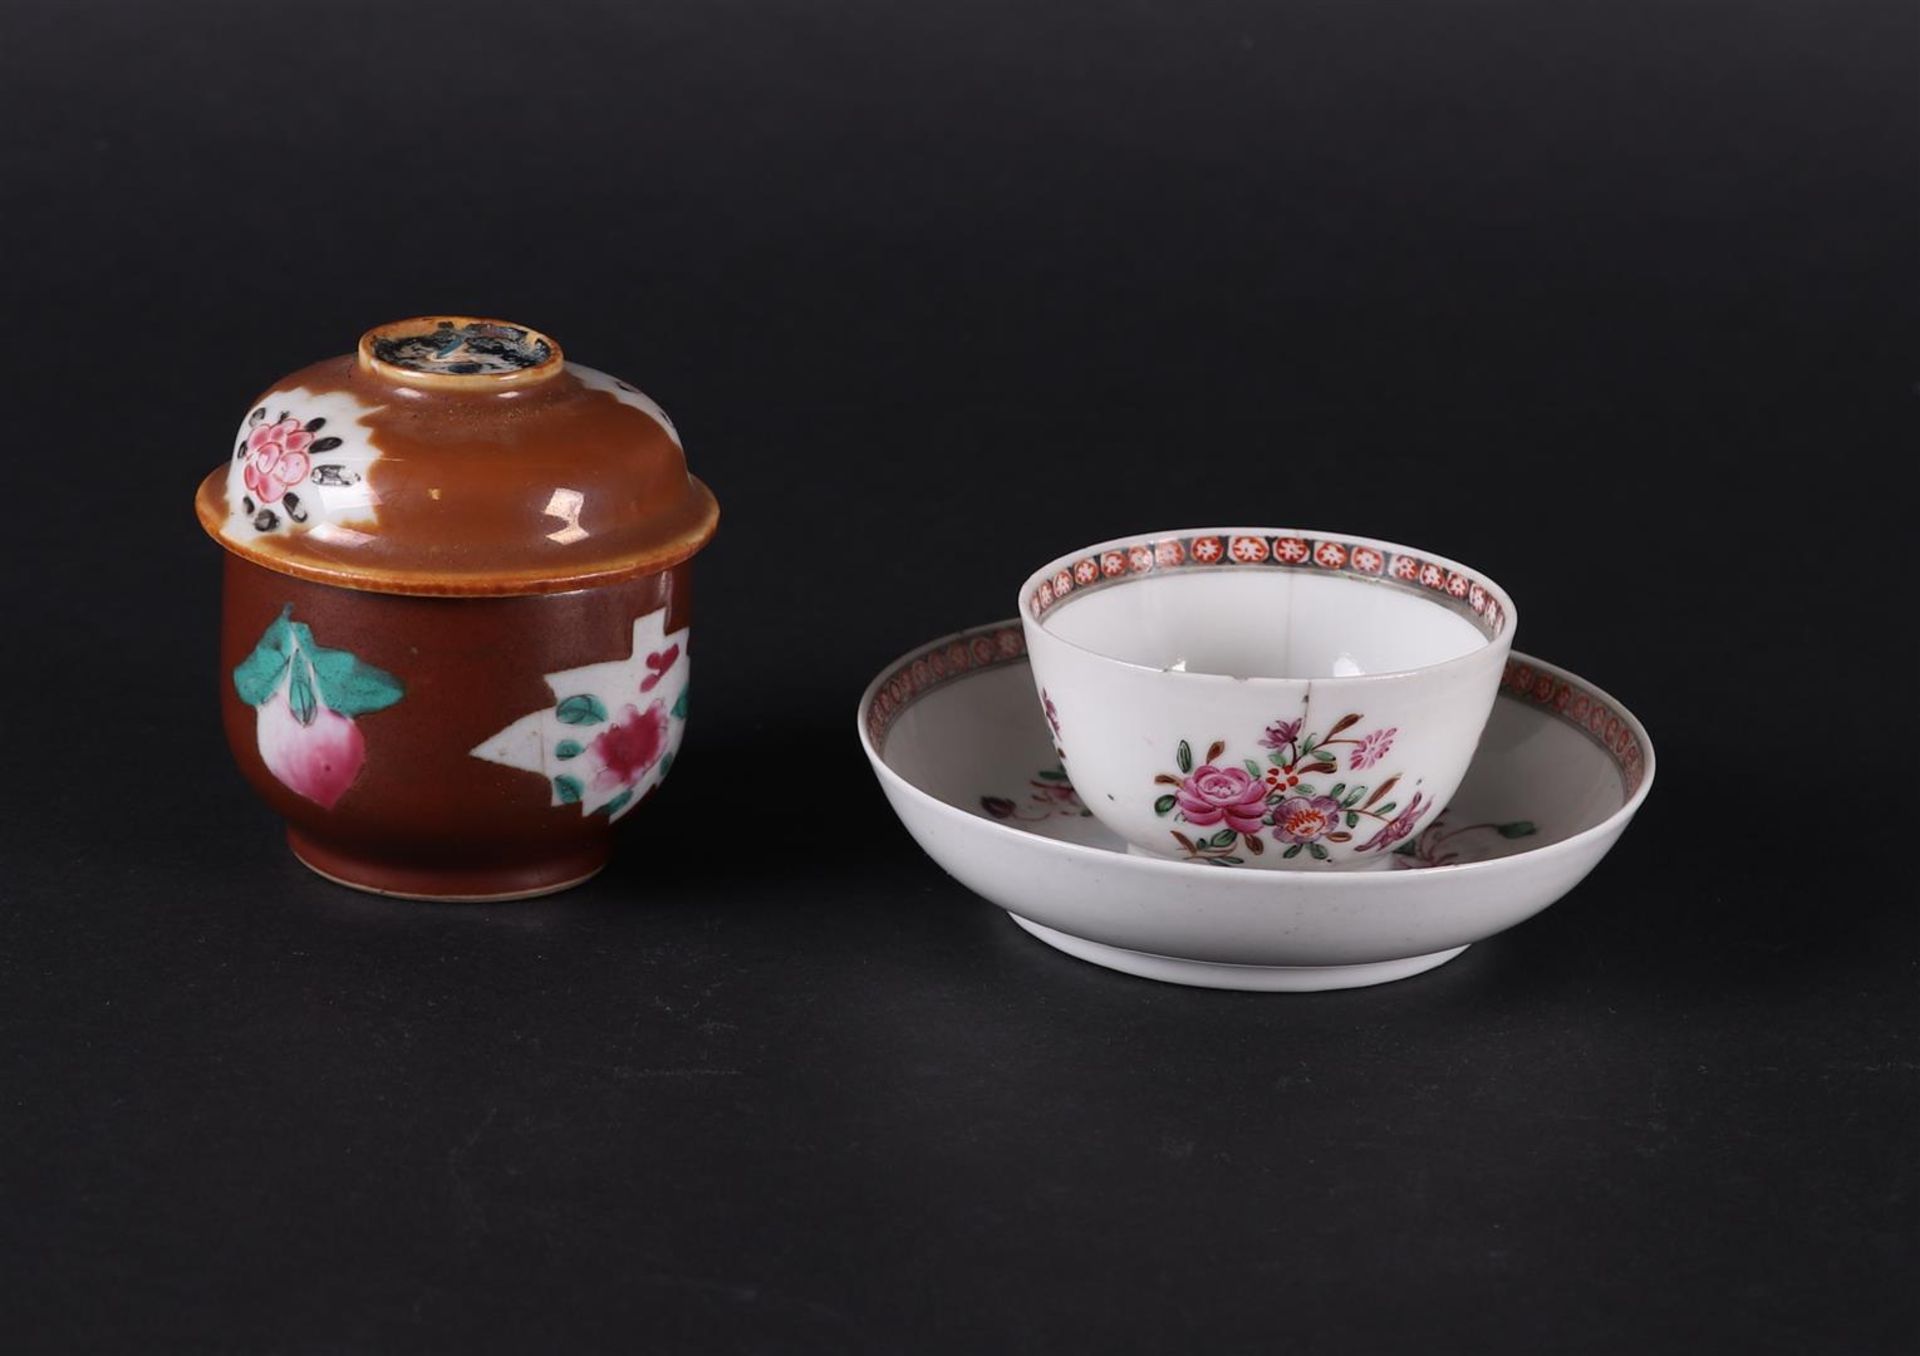 A porcelain Famille Rose cup and saucer with floral decor and sugar bowl with capuchin exterior